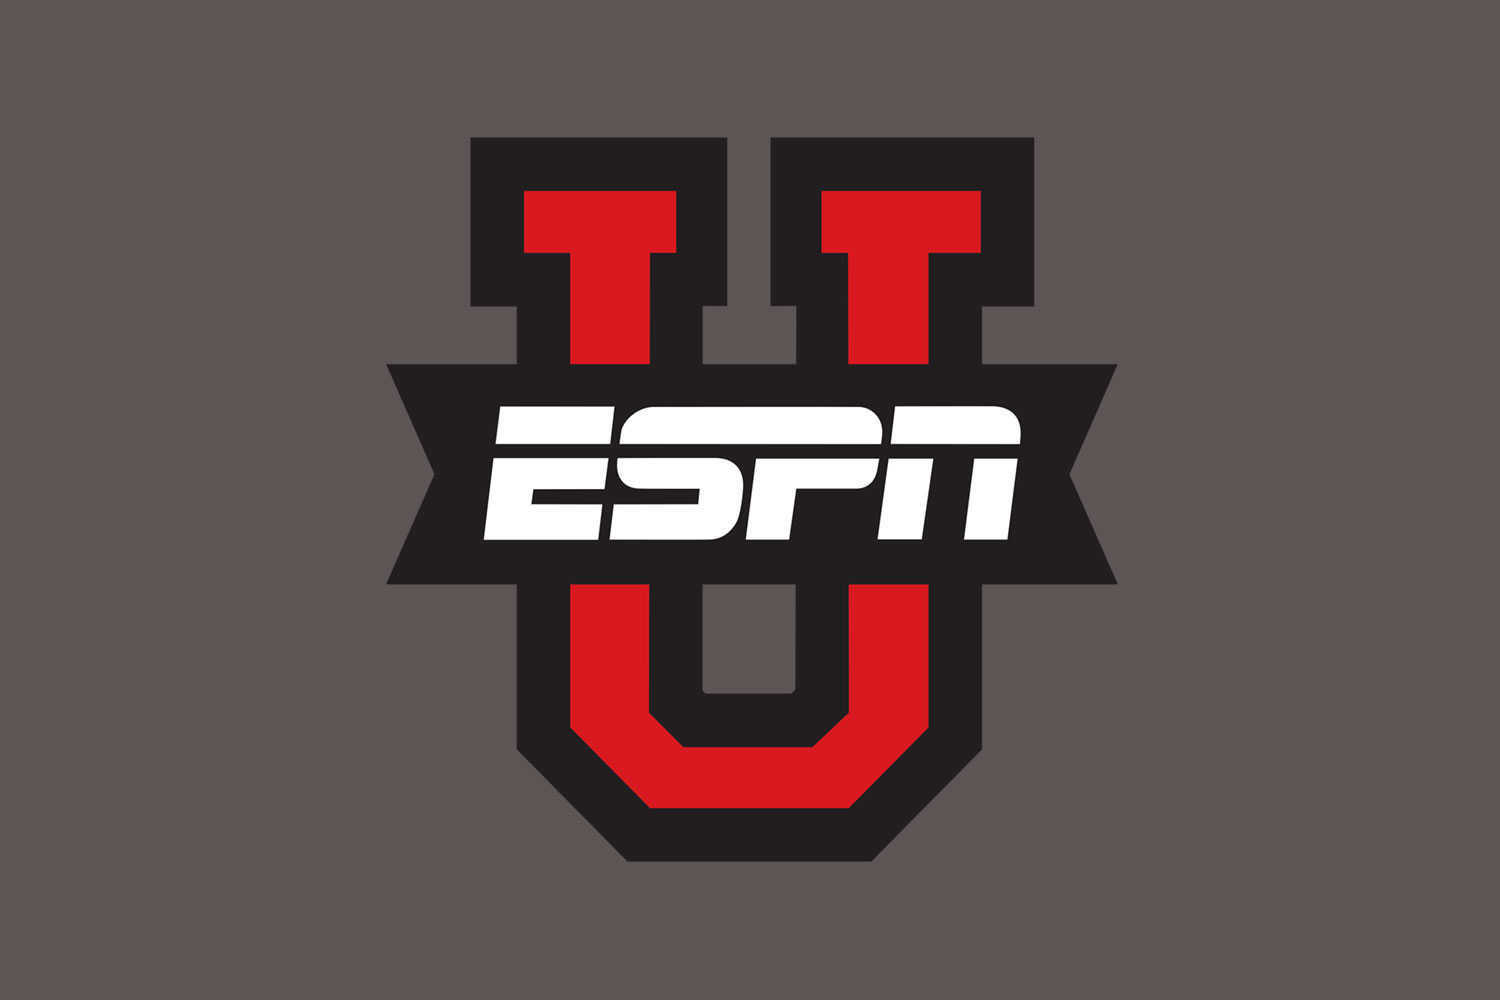 How To Watch ESPNU Without Cable